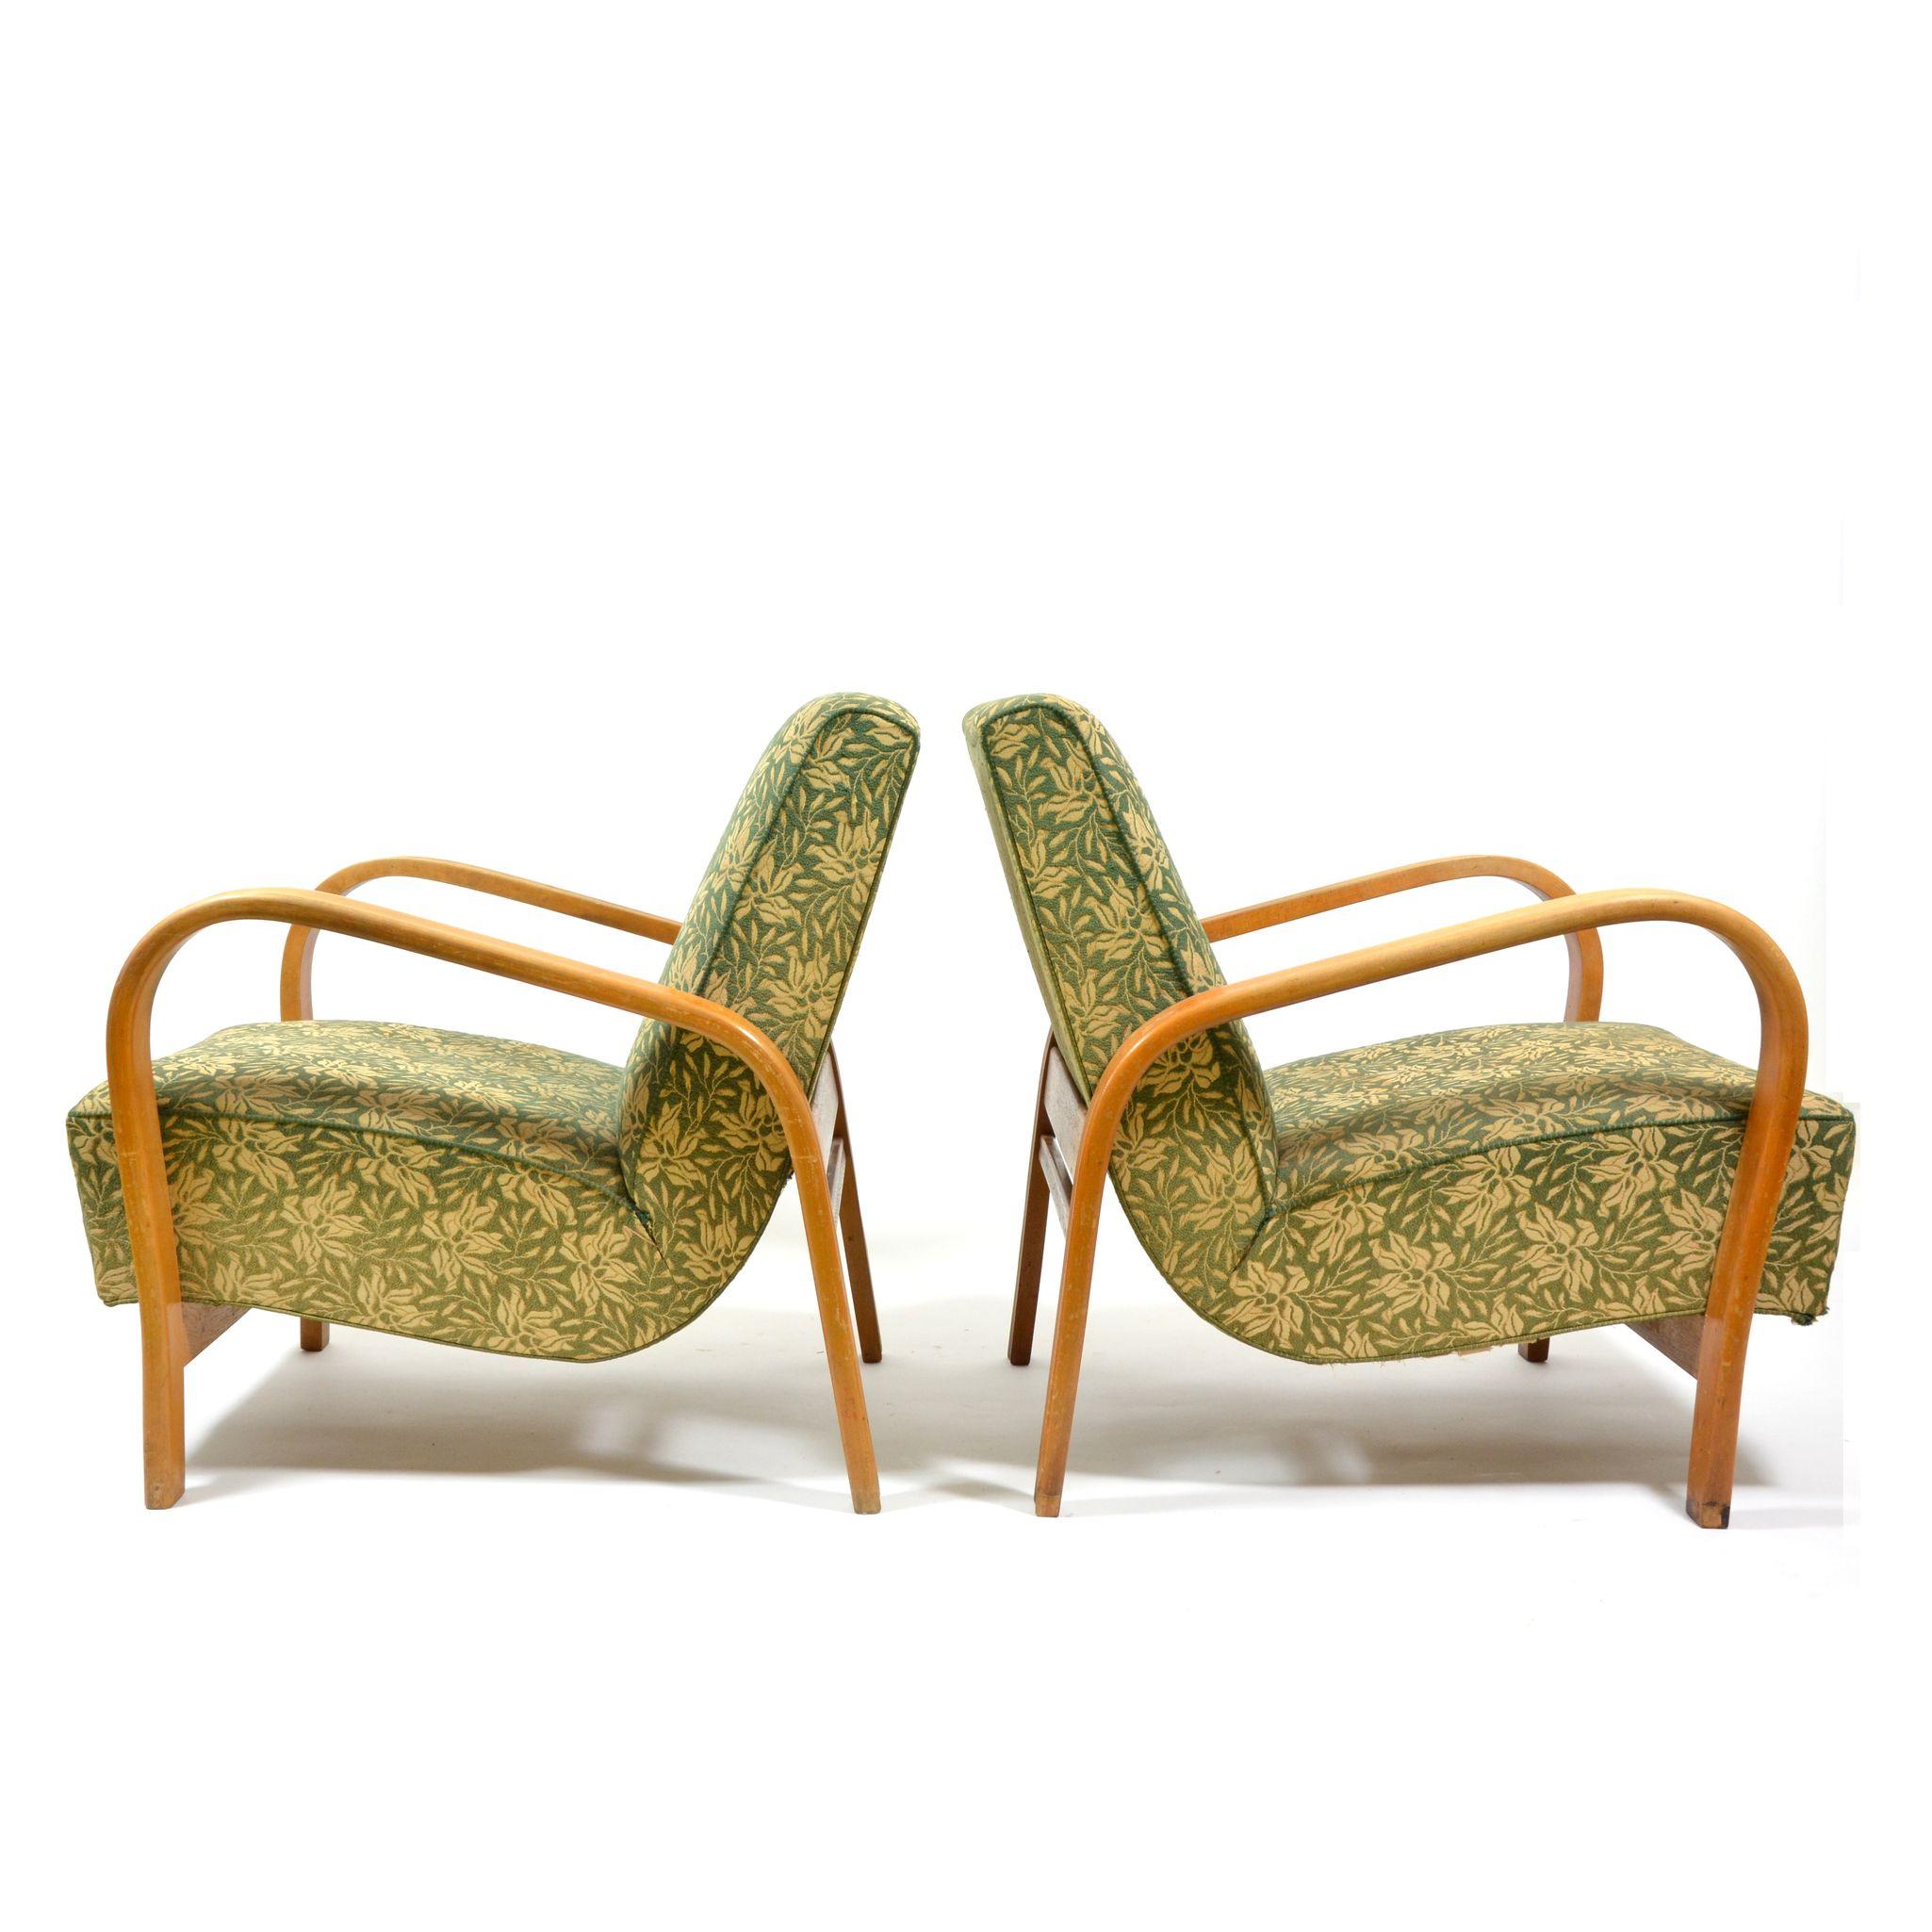 Set of two uphostered armchairs with bended beech wood armrests in light wood colour. Very nice vintage, original condition, with signs of use, but no heavy harms or instability. Uphostery fabric is also original, with green floral motive, with no